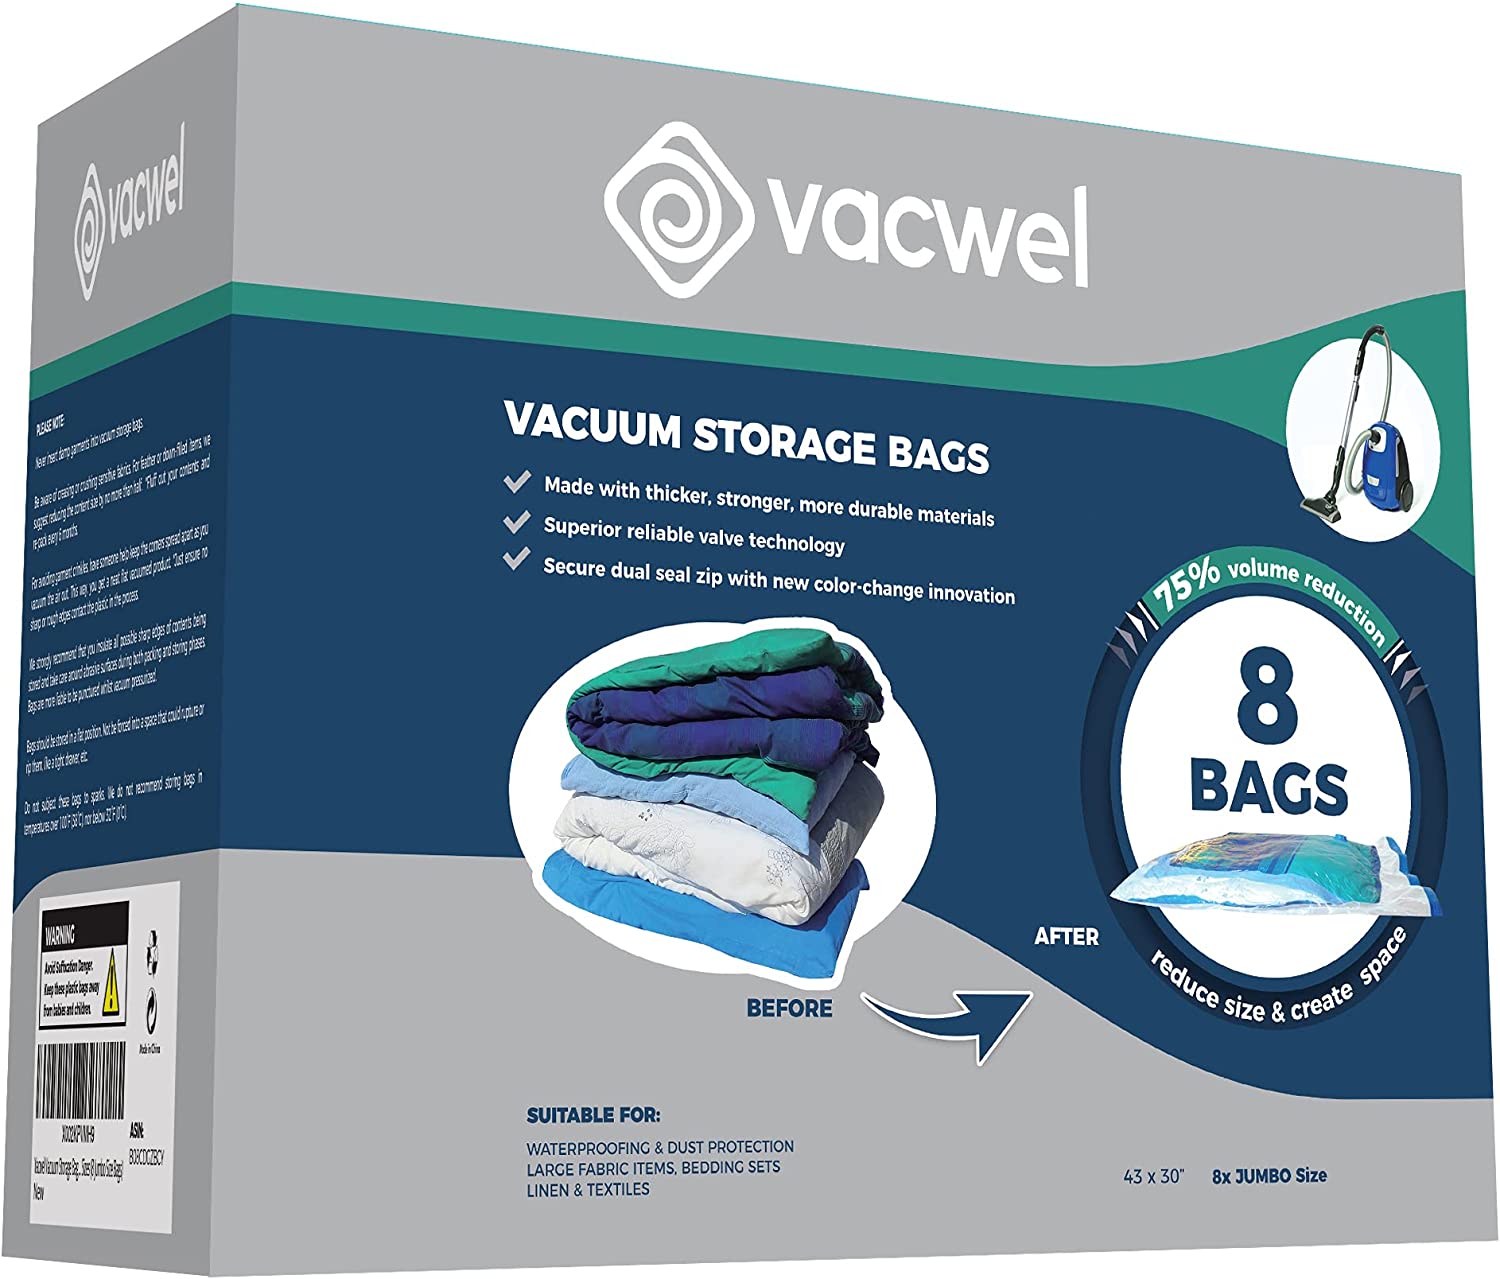 Vacwel Vacuum Storage Bags Made Strong for Packing Clothes Duvets